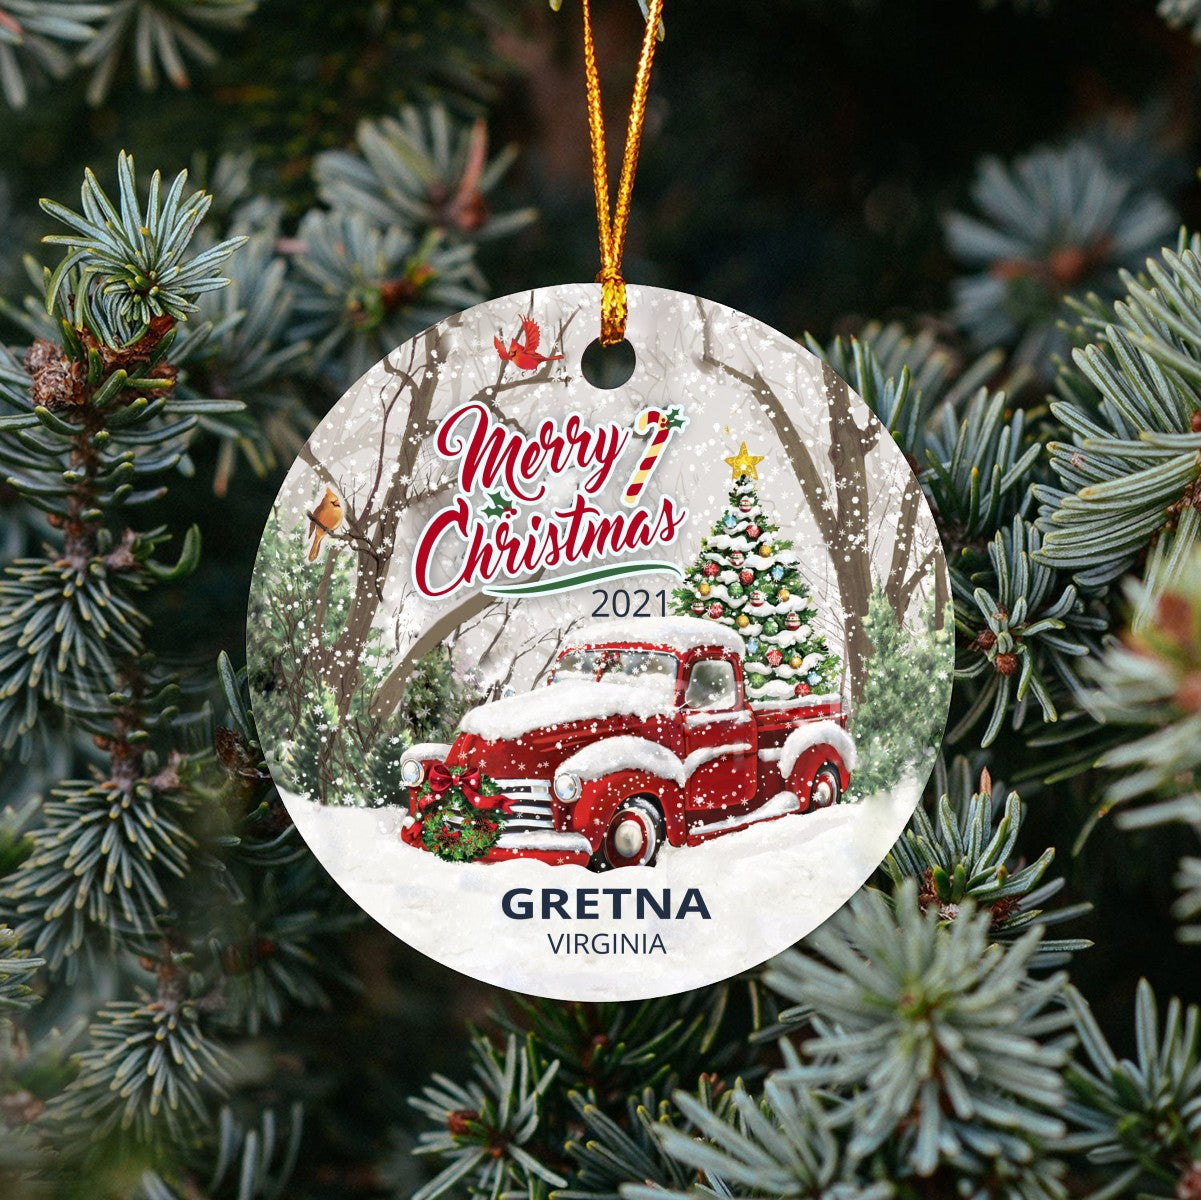 Christmas Tree Ornaments Gretna - Ornament With Name City, State Gretna Virginia VA Ornament - Red Truck Xmas Ornaments 3'' Plastic Gift For Family, Friend And Housewarming